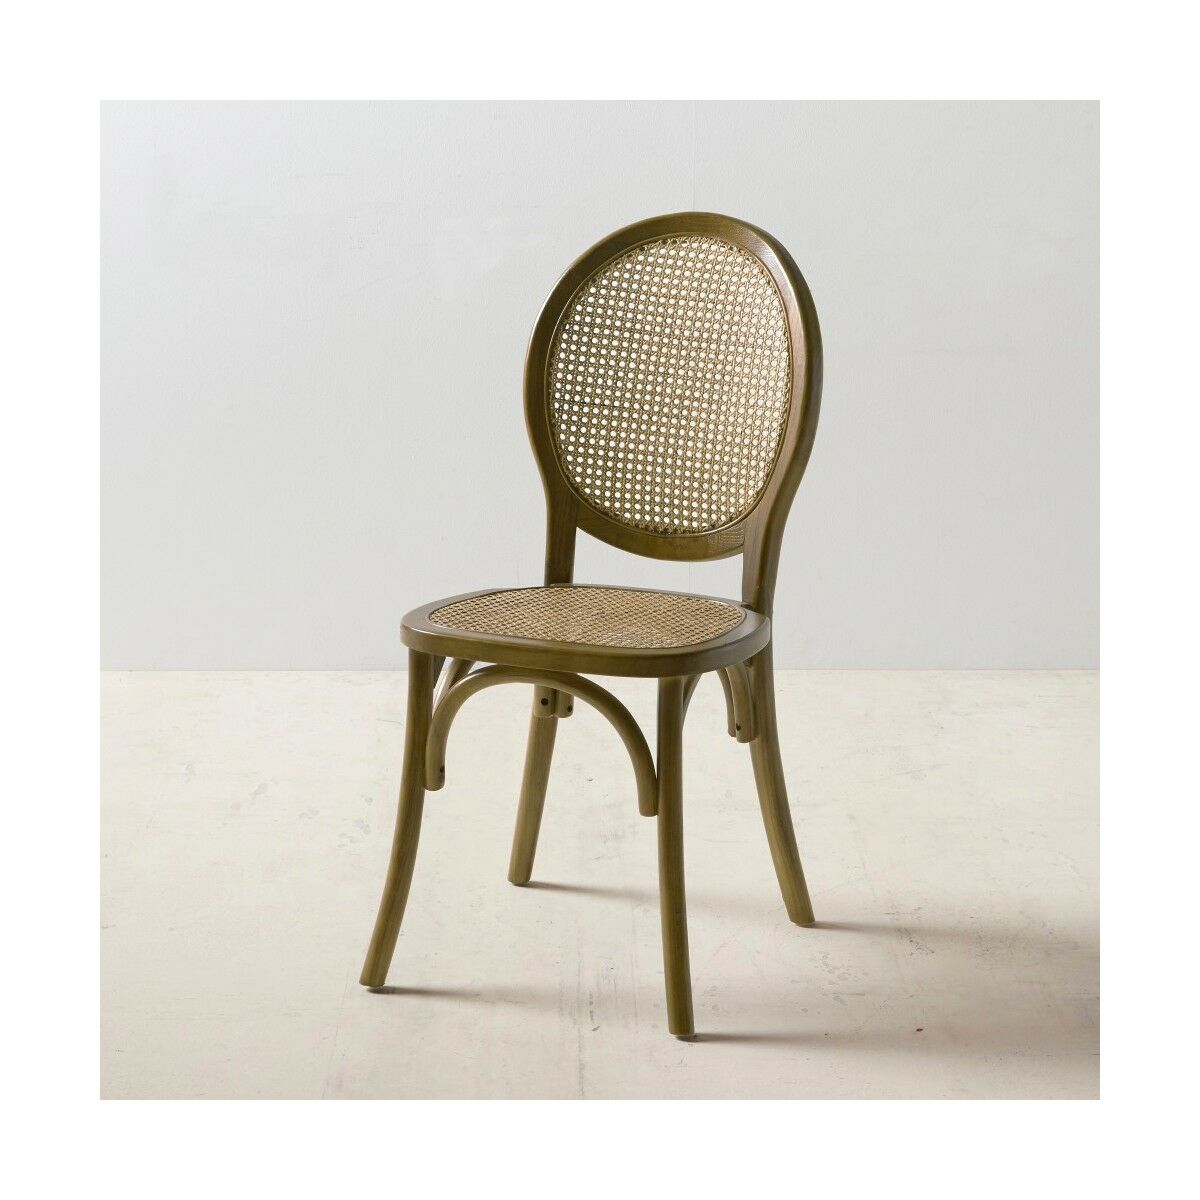 Dining Chair in Wood and Rattan (45 x 42 x 94 cm)